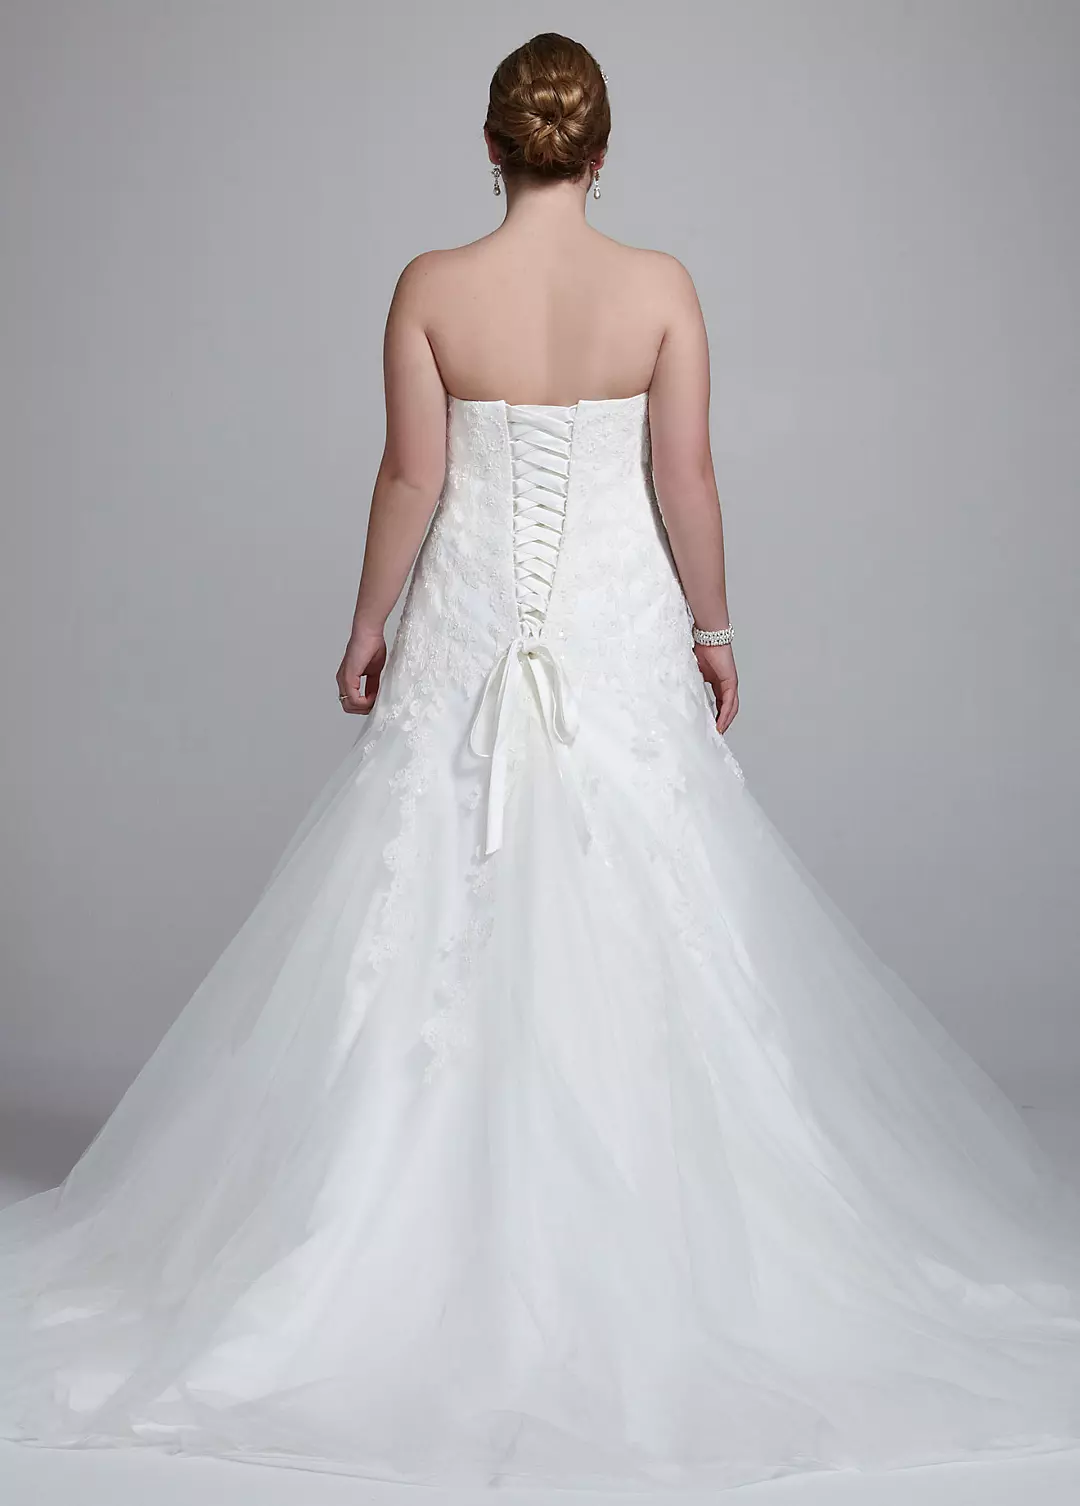 Strapless Tulle Wedding Gown with Beaded Appliques Image 2